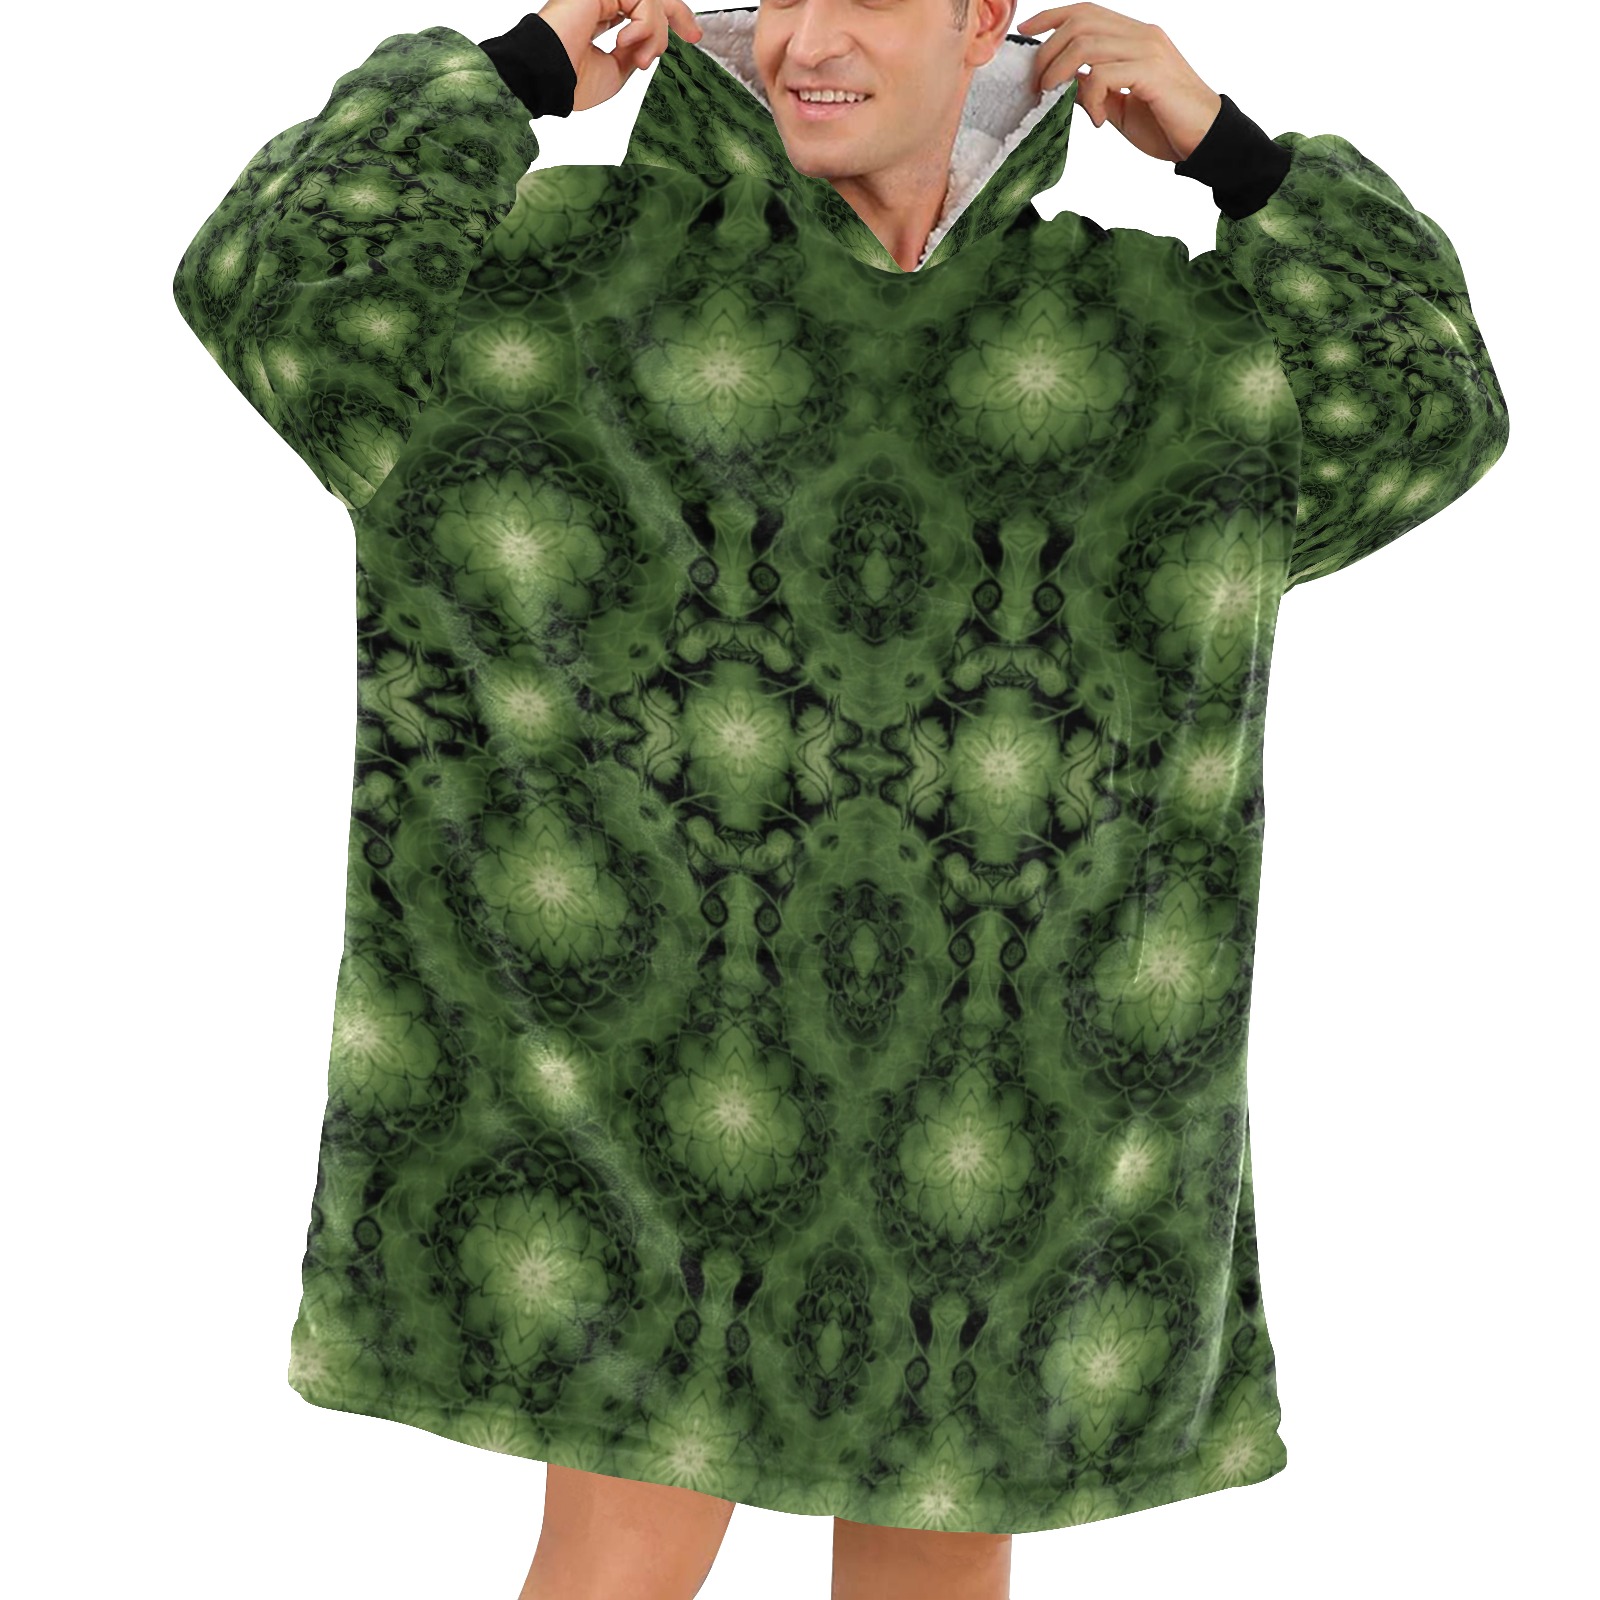 Nidhi decembre 2014-pattern 7-44x55 inches-green 2 Blanket Hoodie for Men